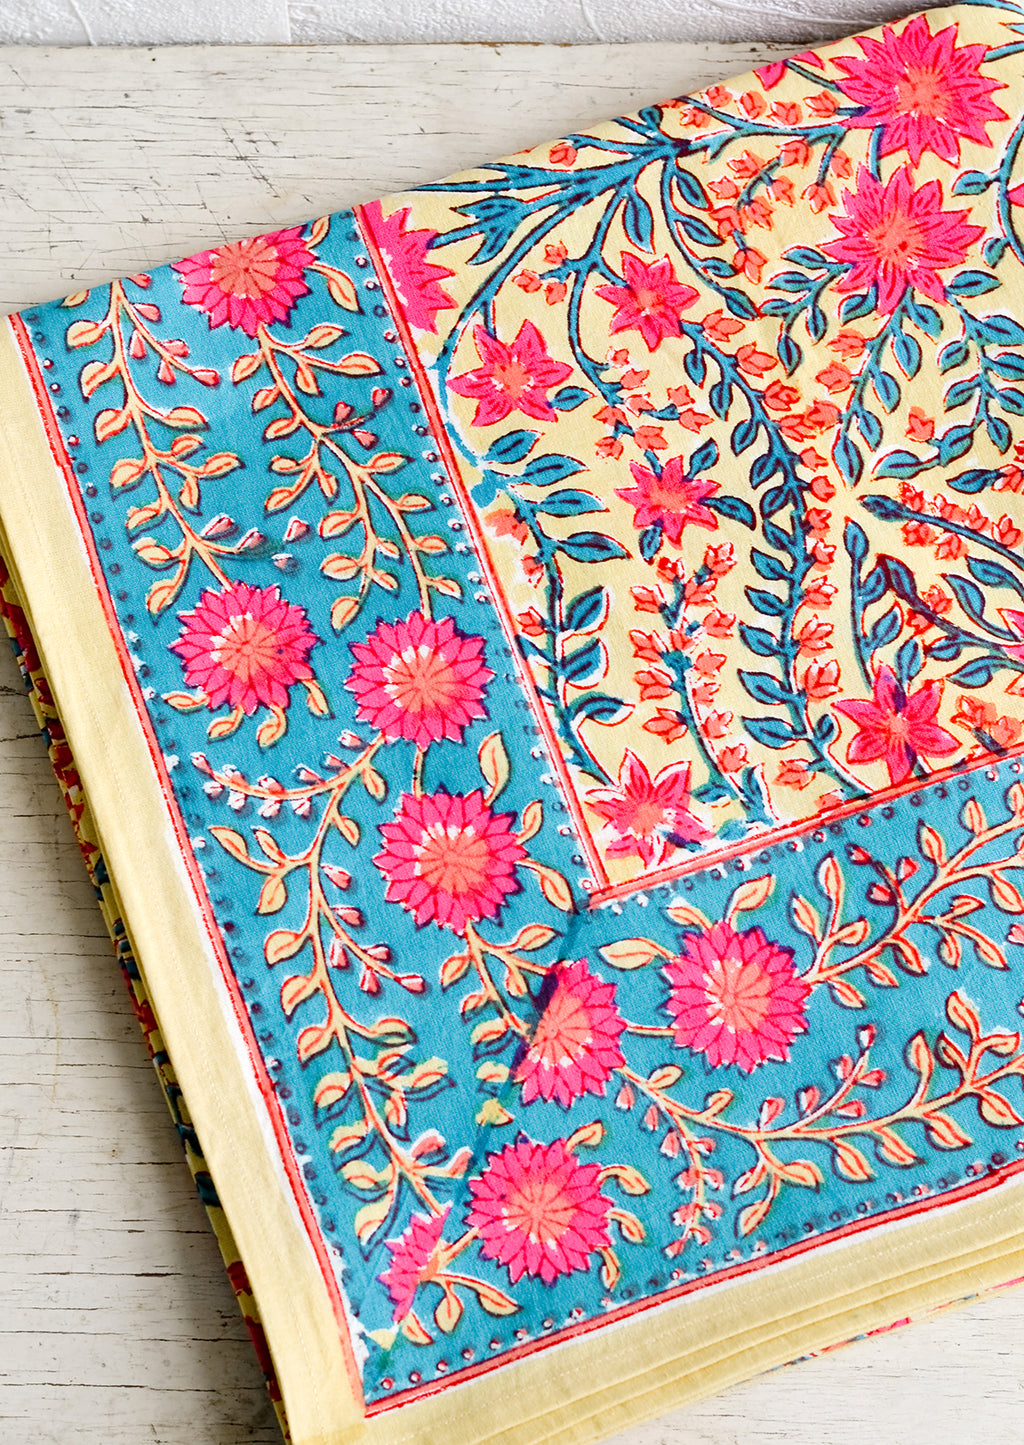 2: A vibrantly colored block printed tablecloth with floral print.